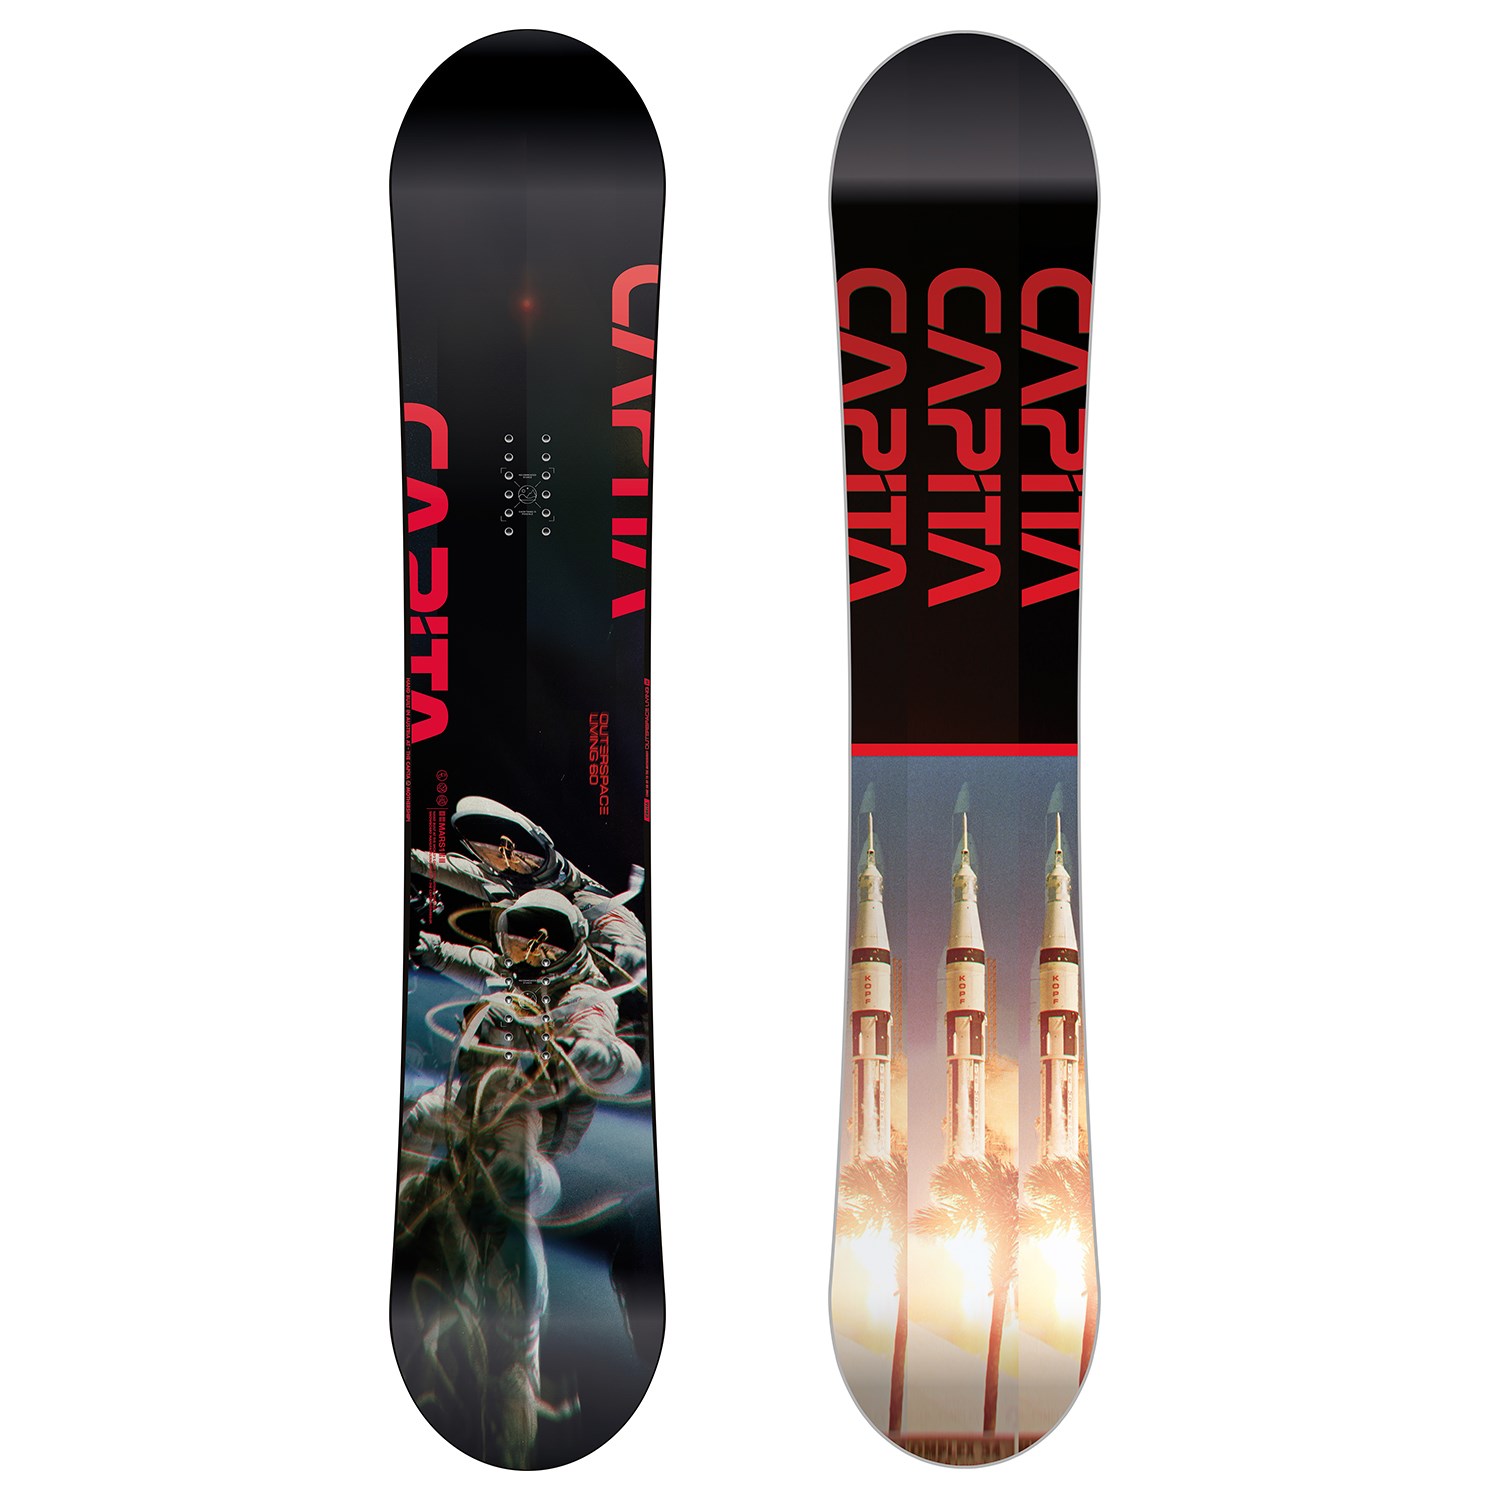 CAPiTA Outerspace Living Snowboard 2020 | evo